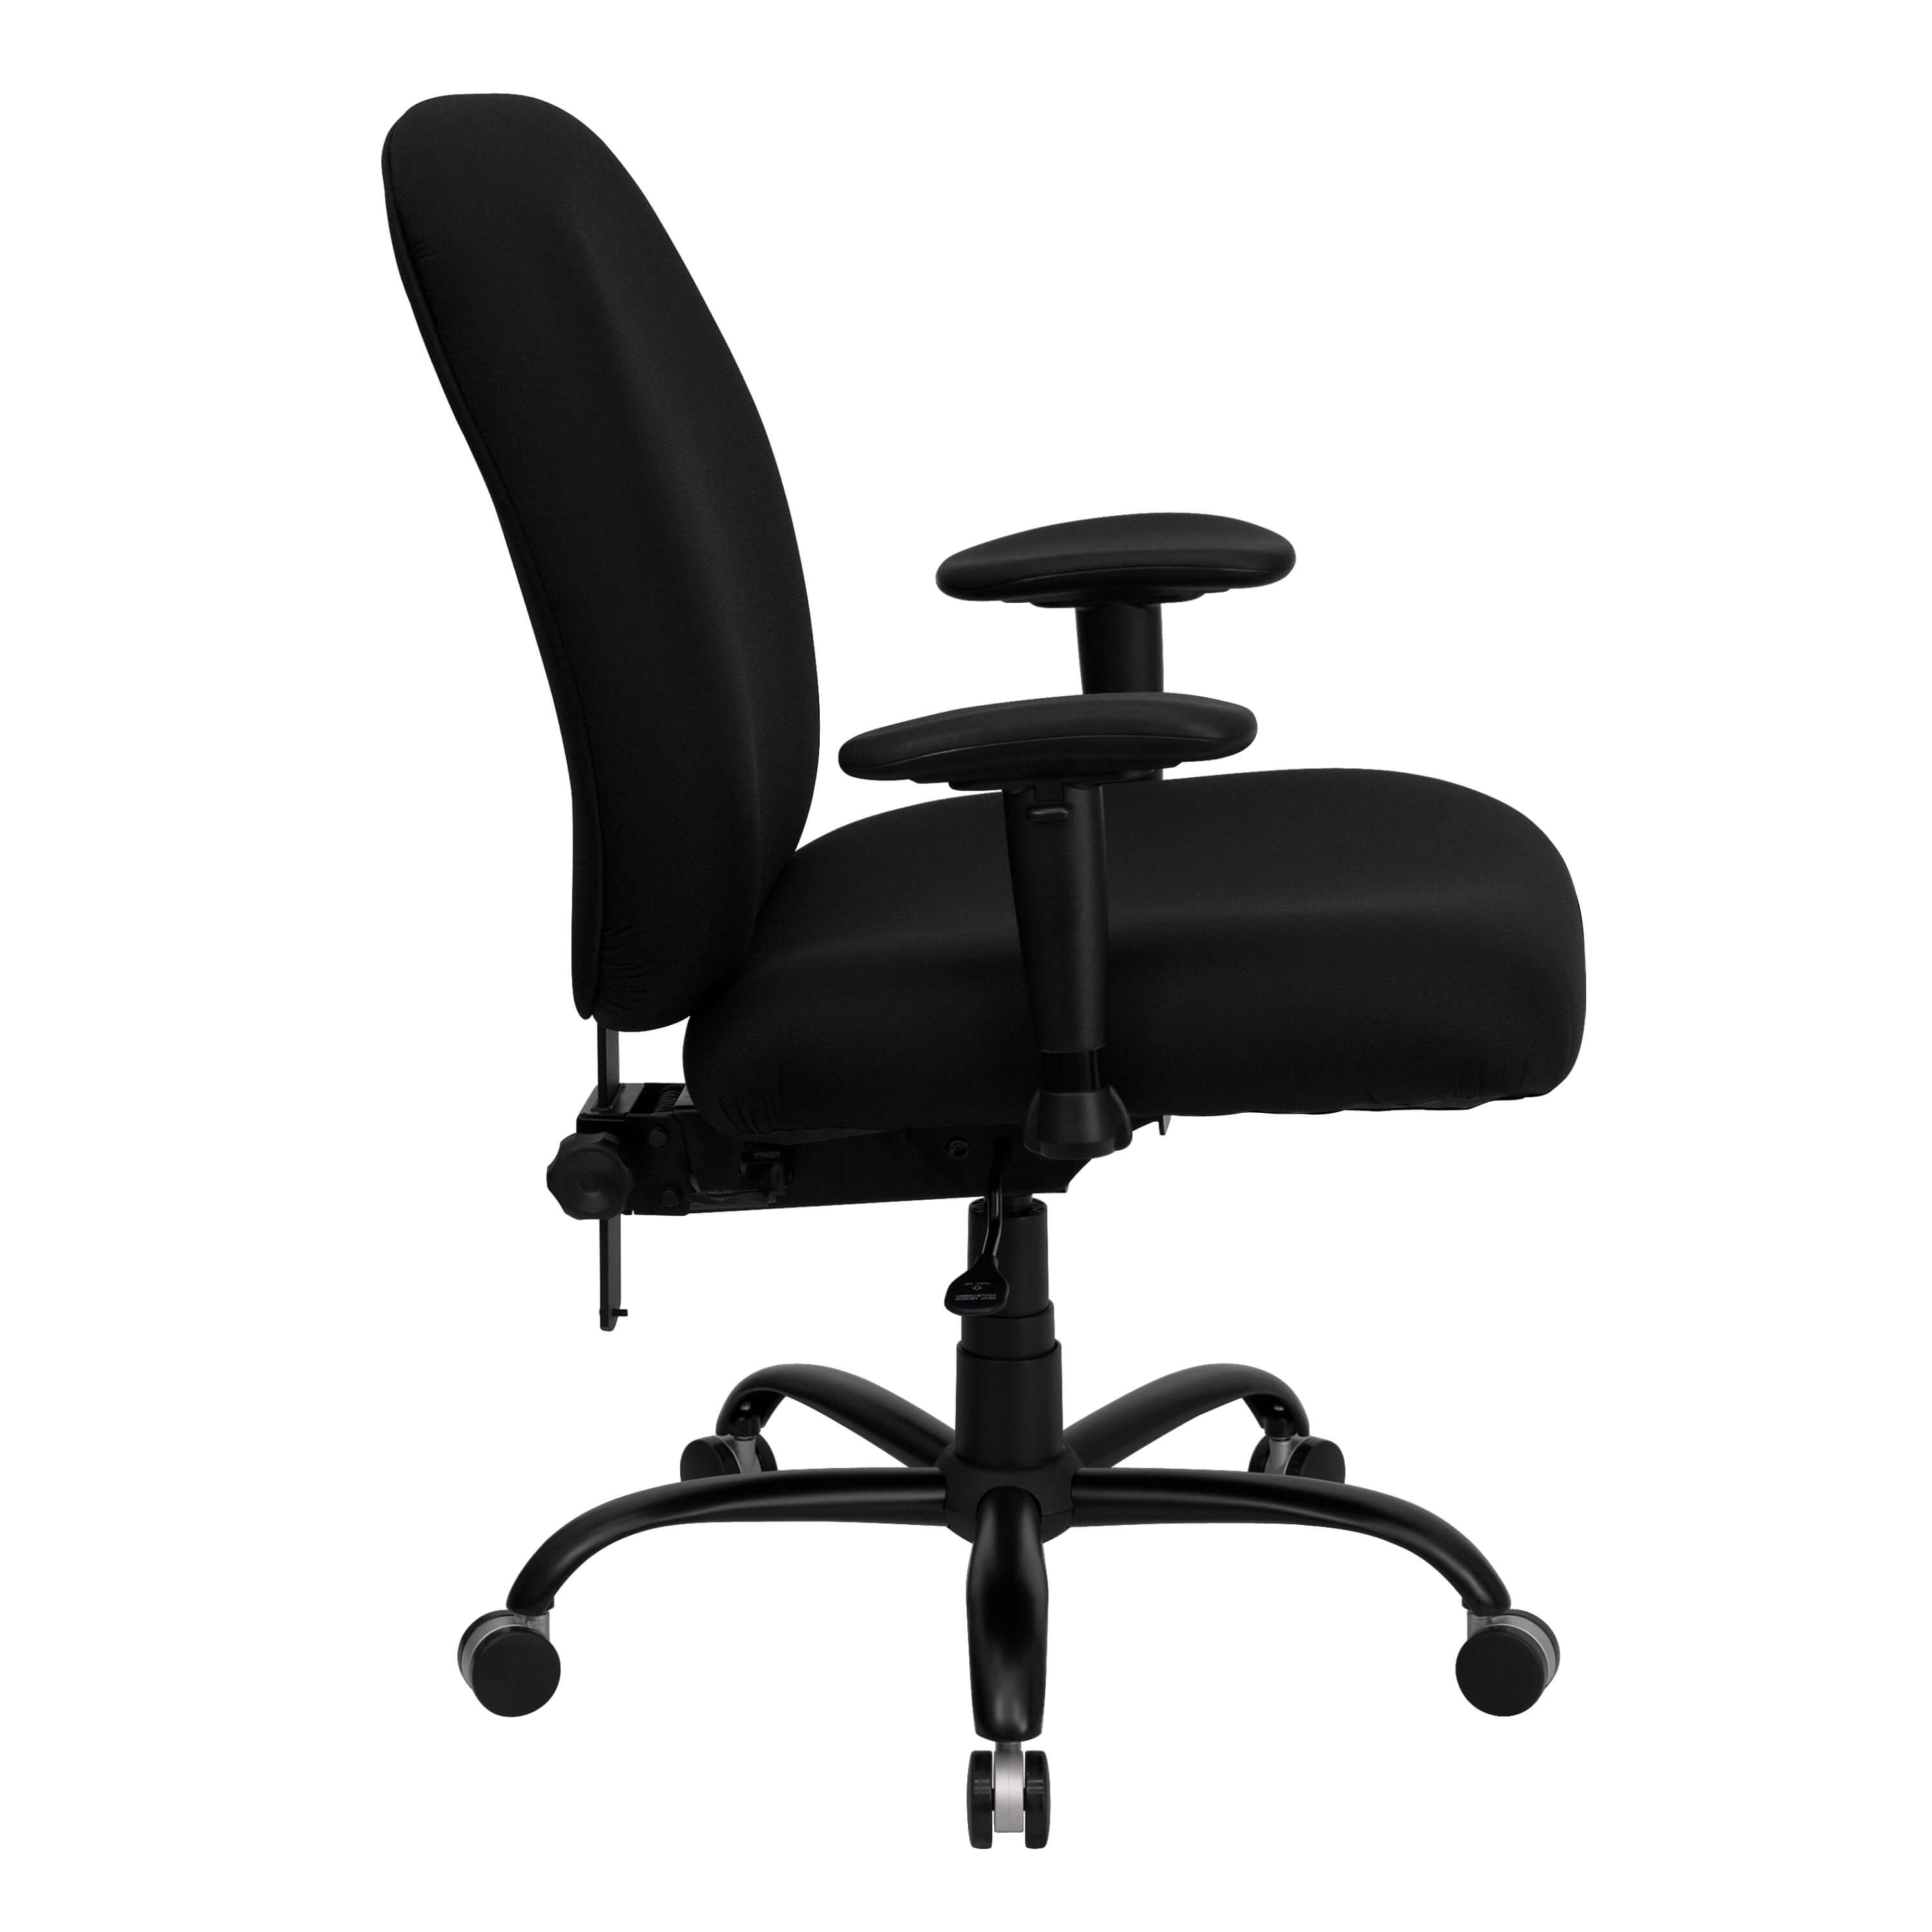 Office chair 400 lb weight capacity side view